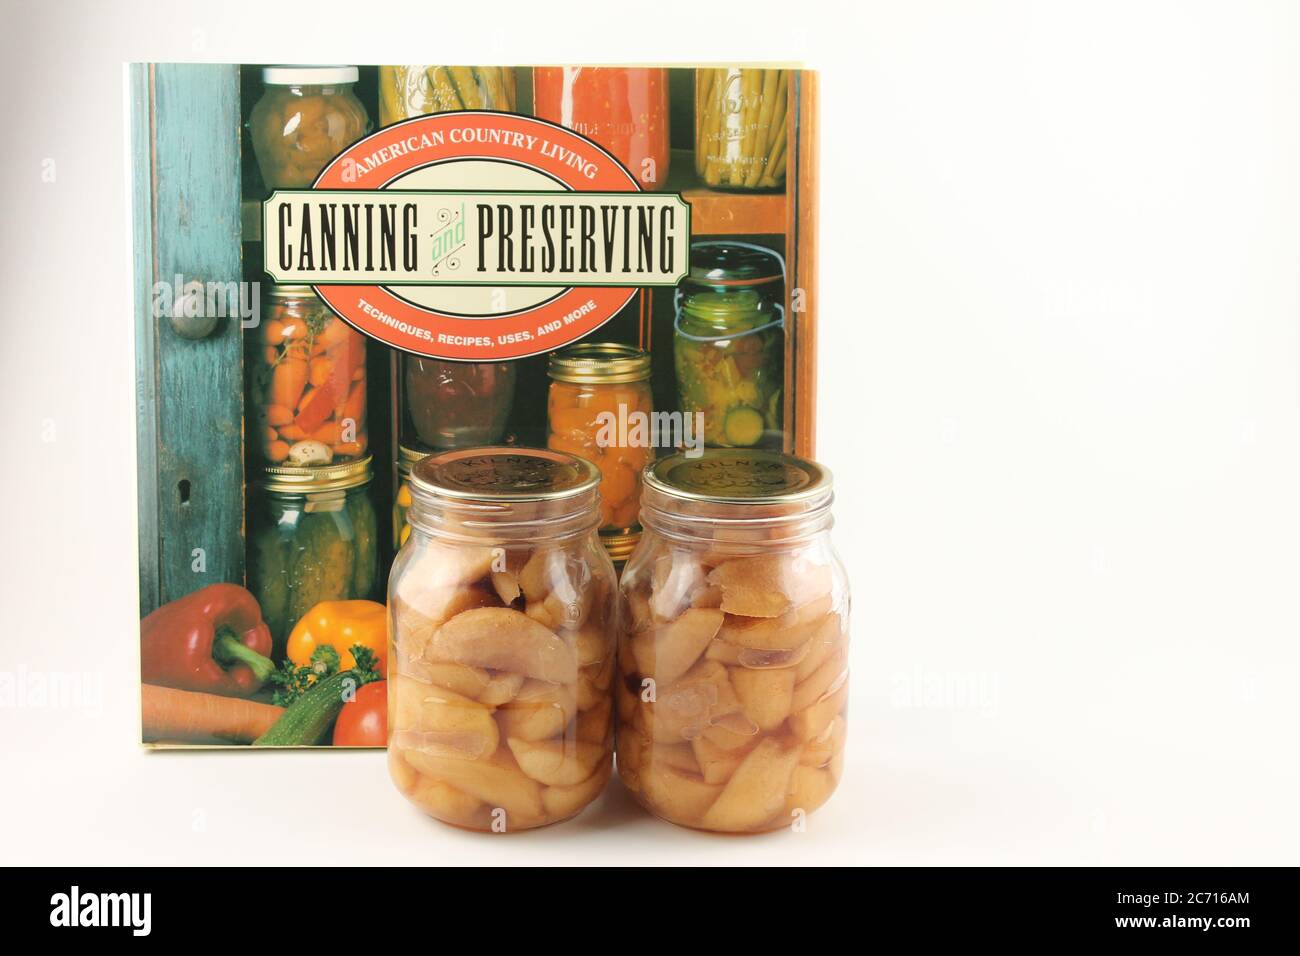 Canning and preserving american country living cook book with two glass jars of preserved apples isolated on a white background, copy space Stock Photo